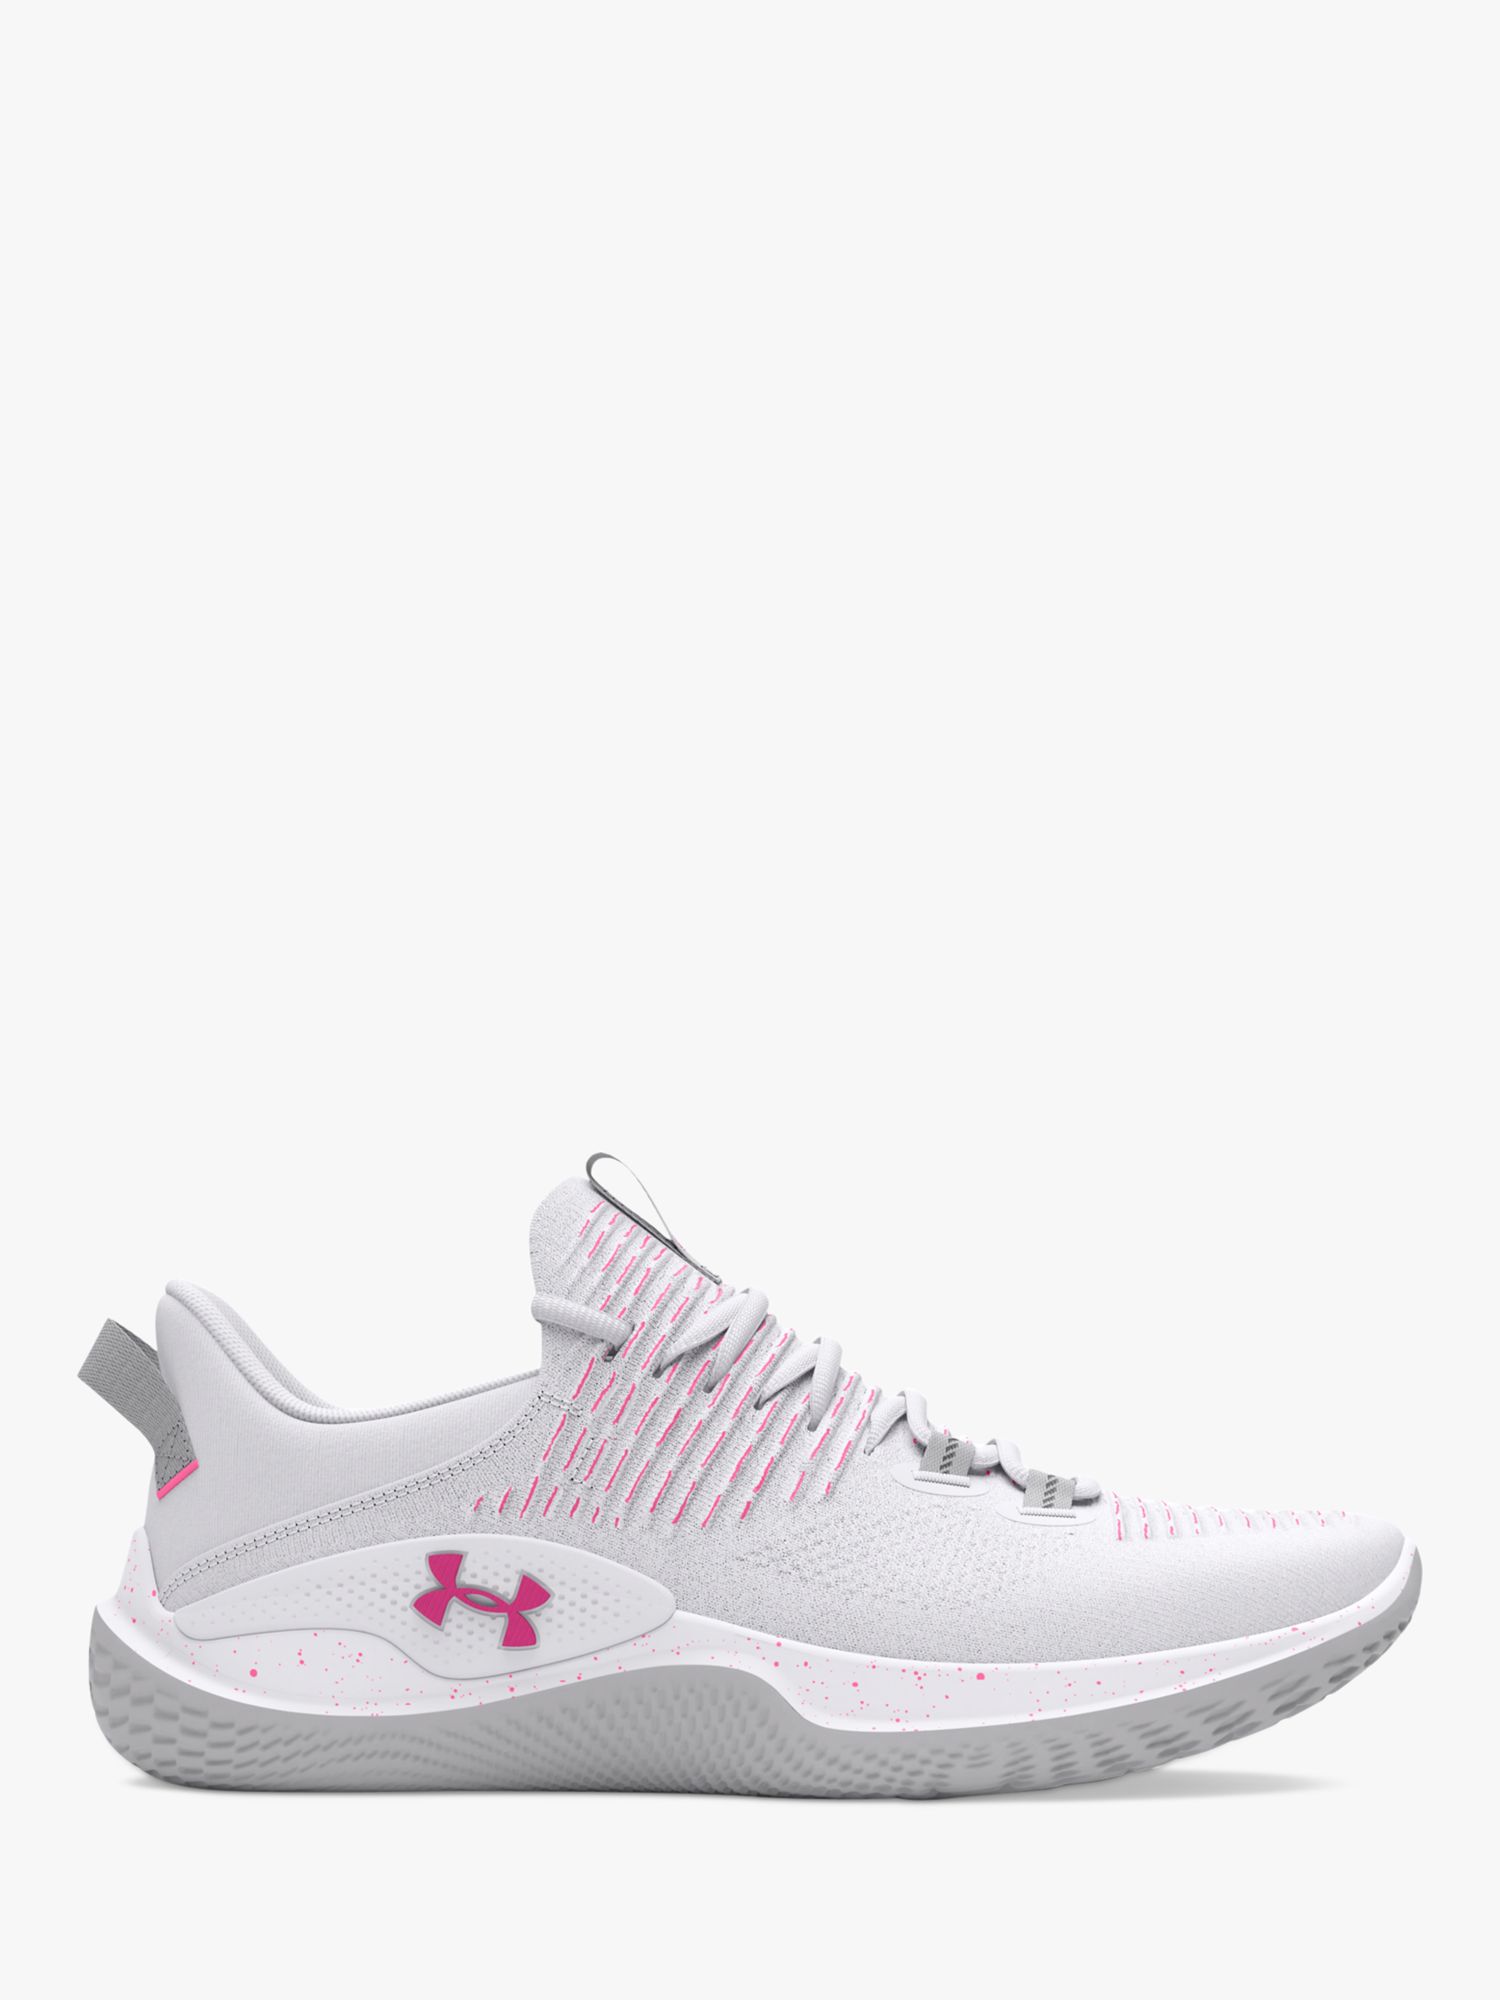 Under Armour Flow Dynamic Women's Training Shoes, White/Grey, 5